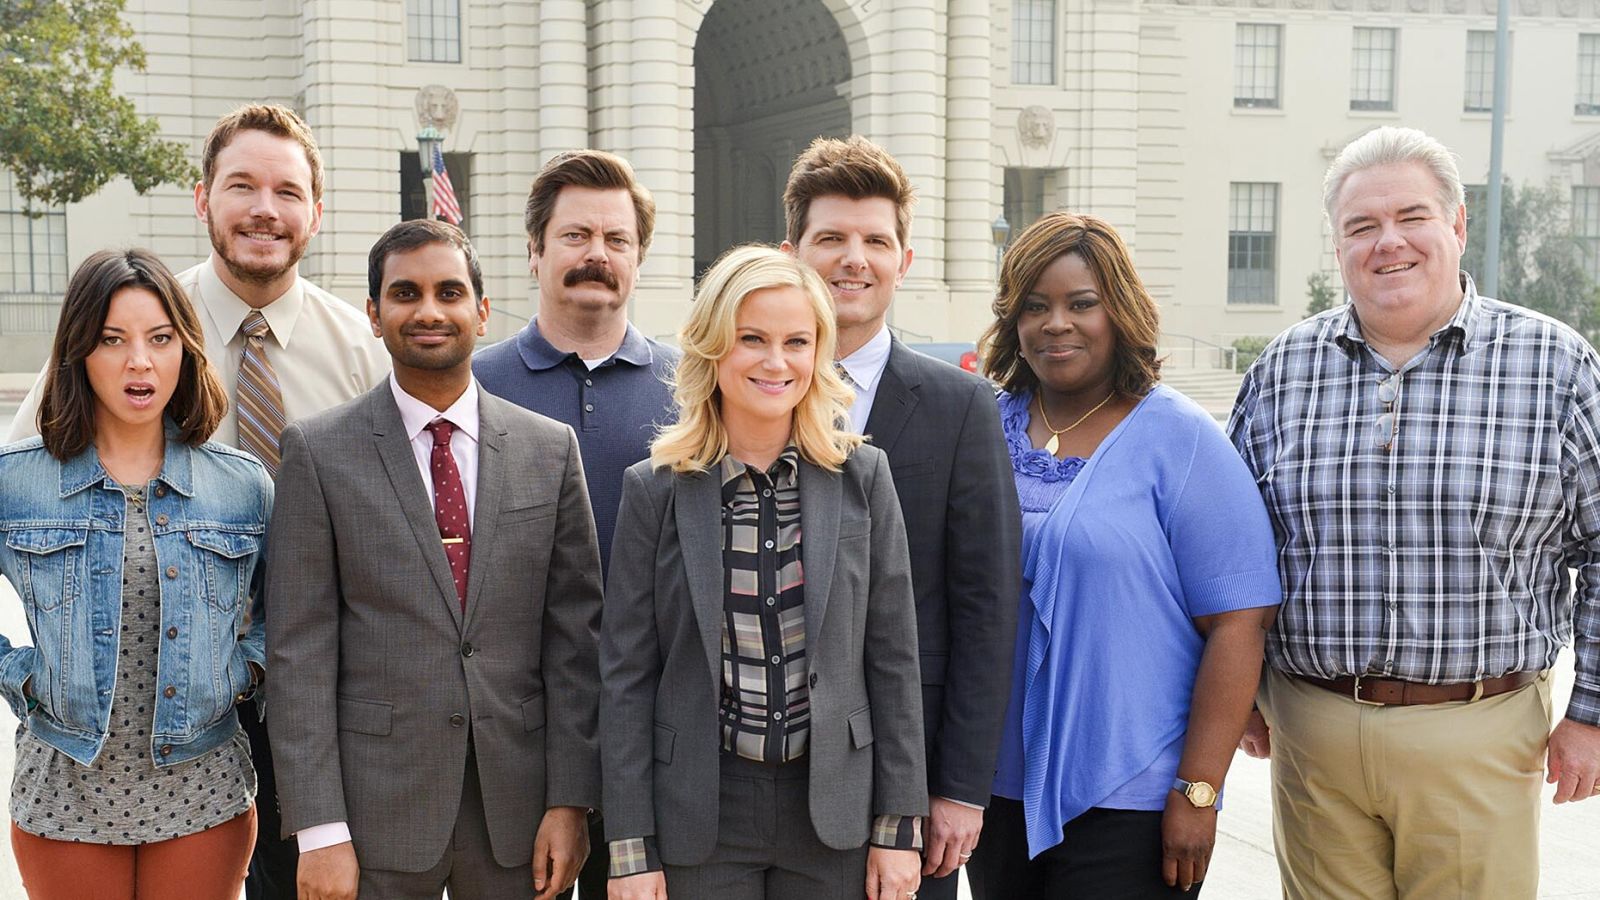 Illustration for article titled Parks and Recreation Reunion Special to Raise Money for COVID Relief